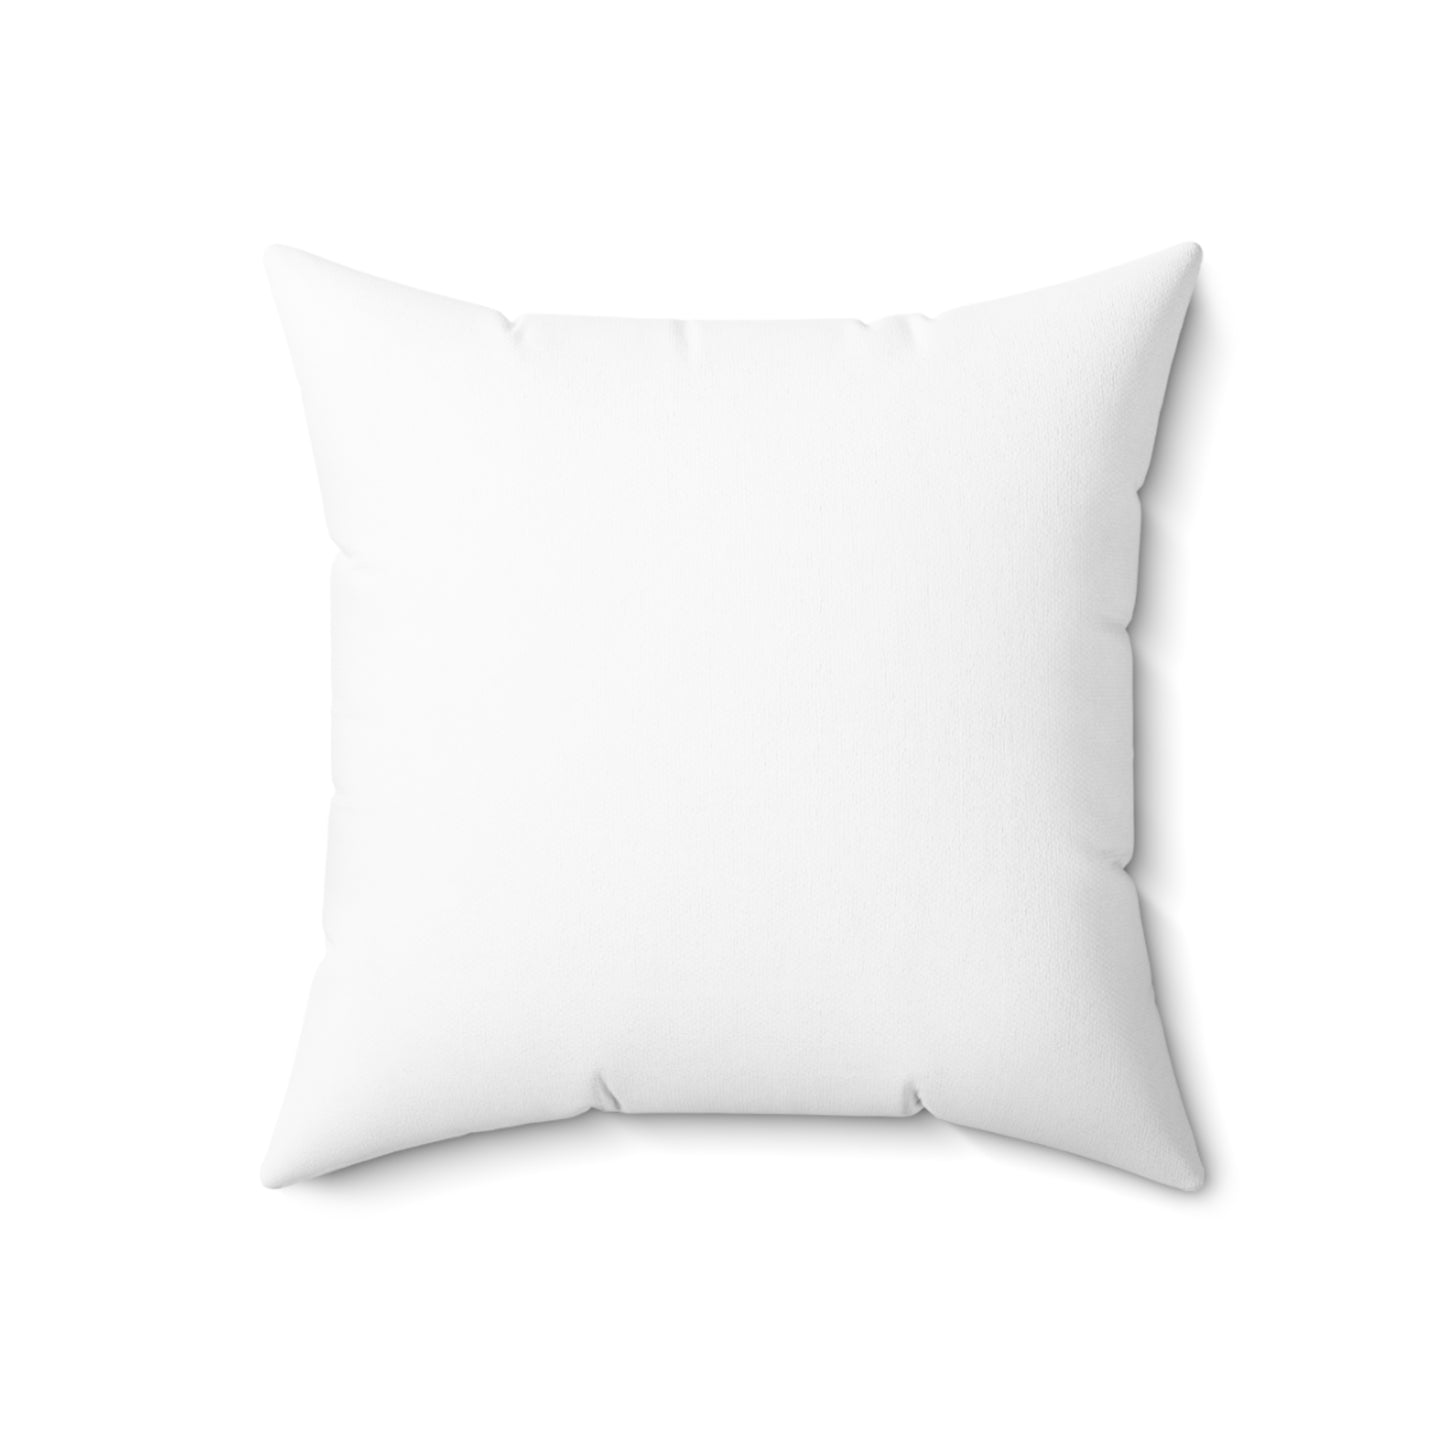 Jesus Washes Feet Of Disciples-Square Pillow